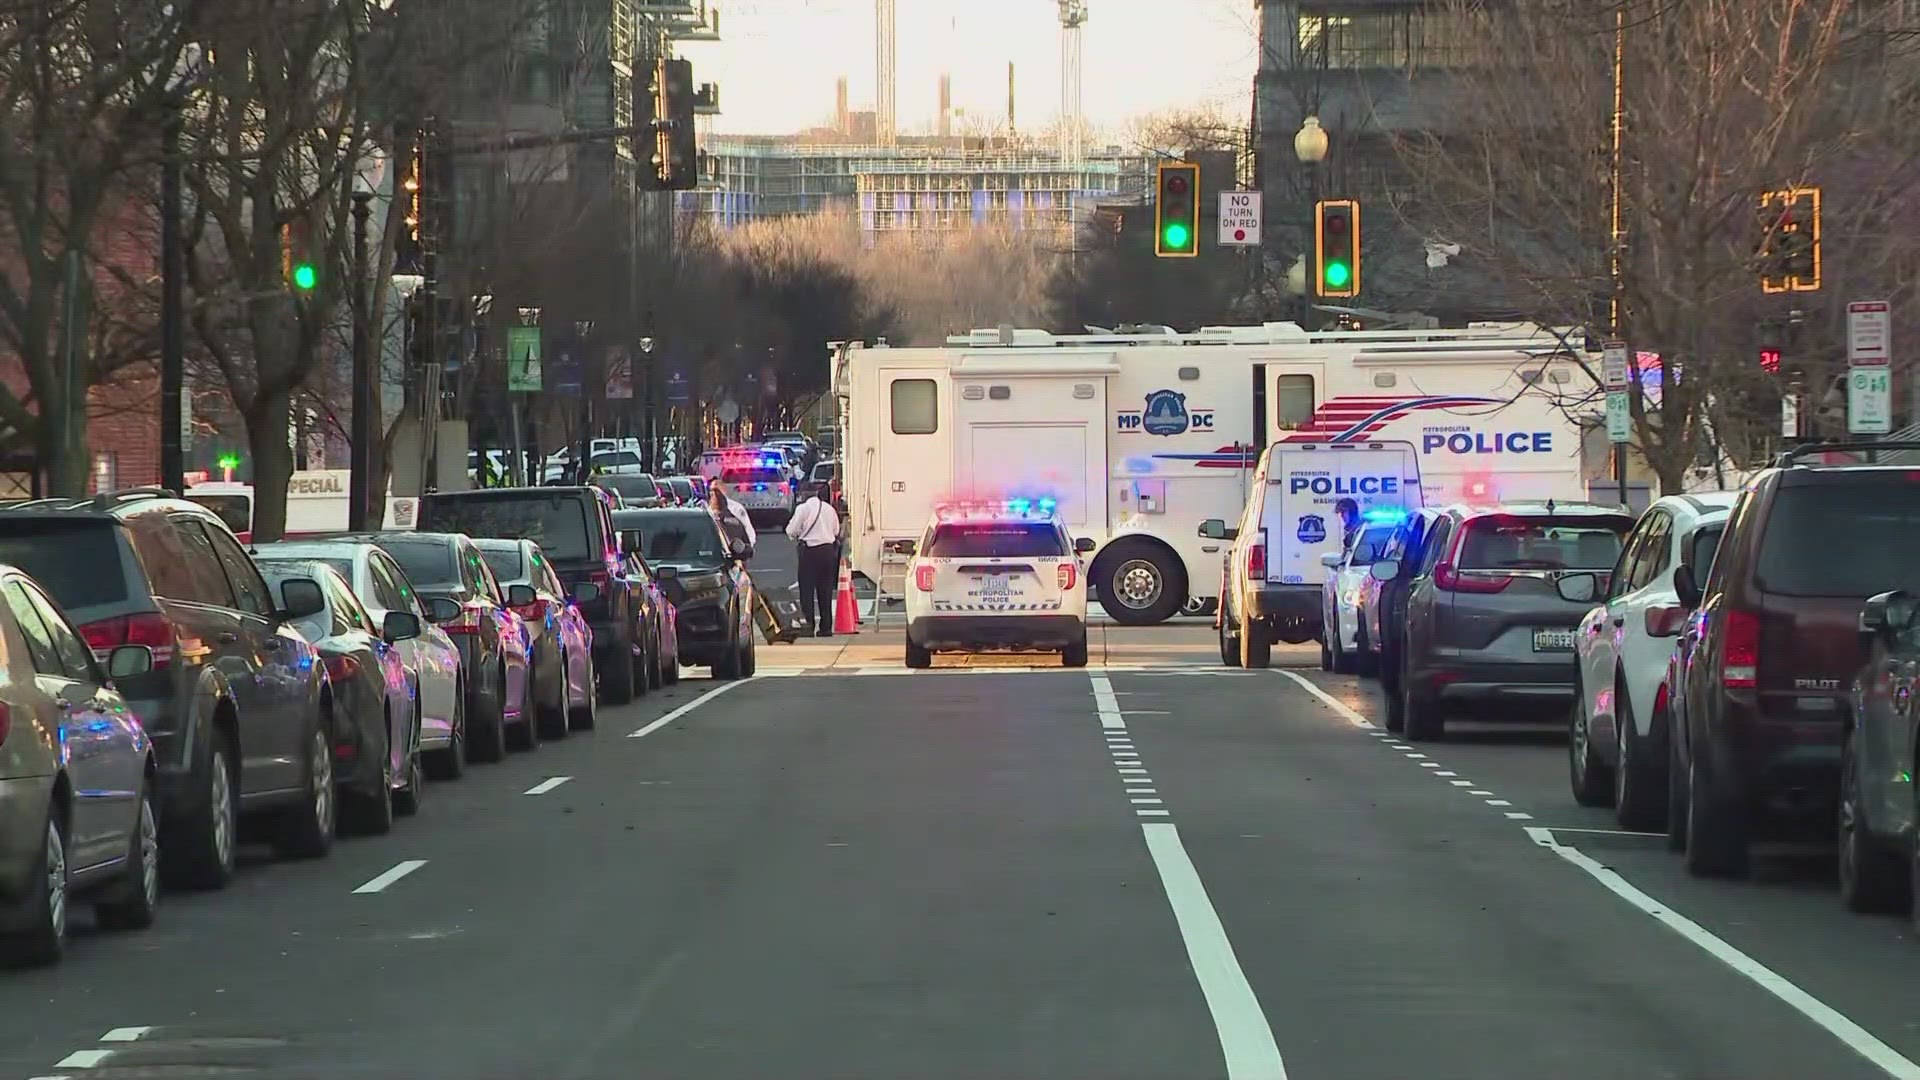 Thursday quickly became a frightening morning for some residents in Navy Yard, D.C. as a shootout and barricade situation unfolded before sunrise.